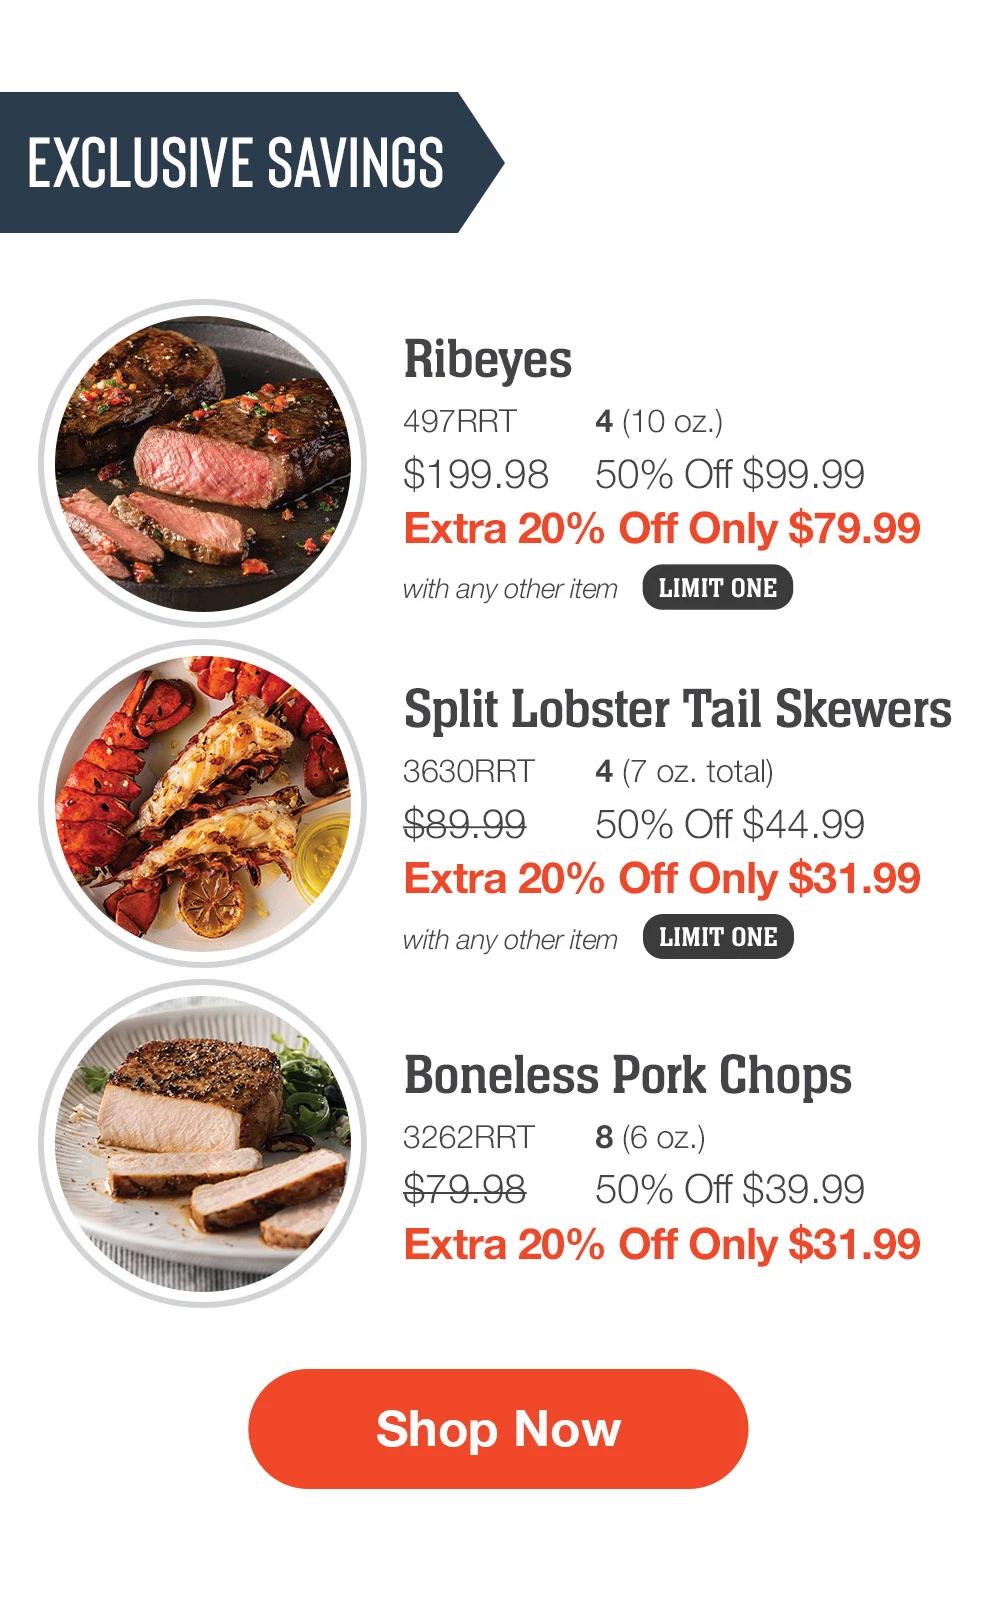 EXCLUSIVE SAVINGS | Ribeyes - 497RRT 4 (10 oz.) $199.98 50% Off $99.99 Extra 20% Off Only $79.99 with any other item LIMIT ONE | Split Lobster Tail Skewers - 3630RRT 4 (7 oz. total) $89.99  50% Off $44.99 Extra 20% Off Only $31.99 with any other item LIMIT ONE | Boneless Pork Chops - 3262RRT 8 (6 oz.) $79.98 50% Off $39.99 Extra 20% Off Only $31.99 || SHOP NOW